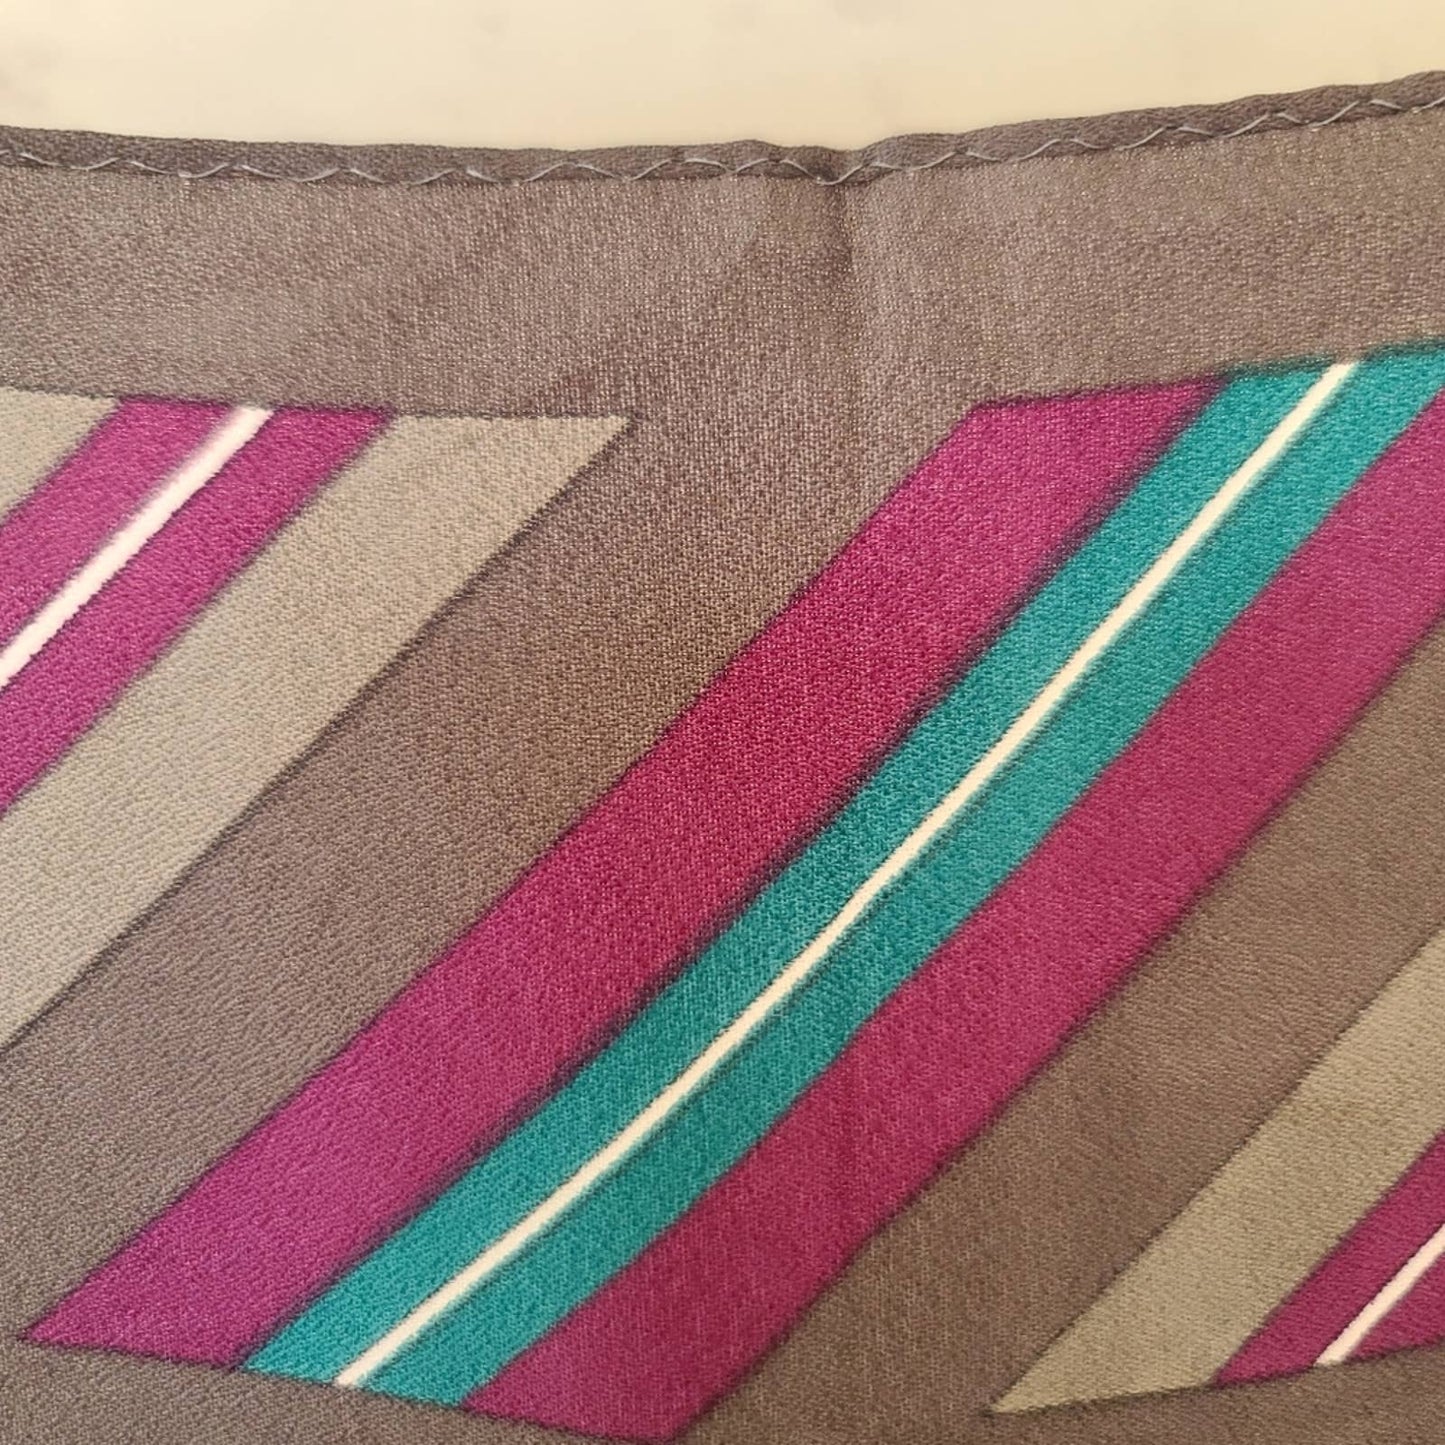 Vintage Square Scarf Grey with Teal and Purple Diamonds and Stripes Print 26x26